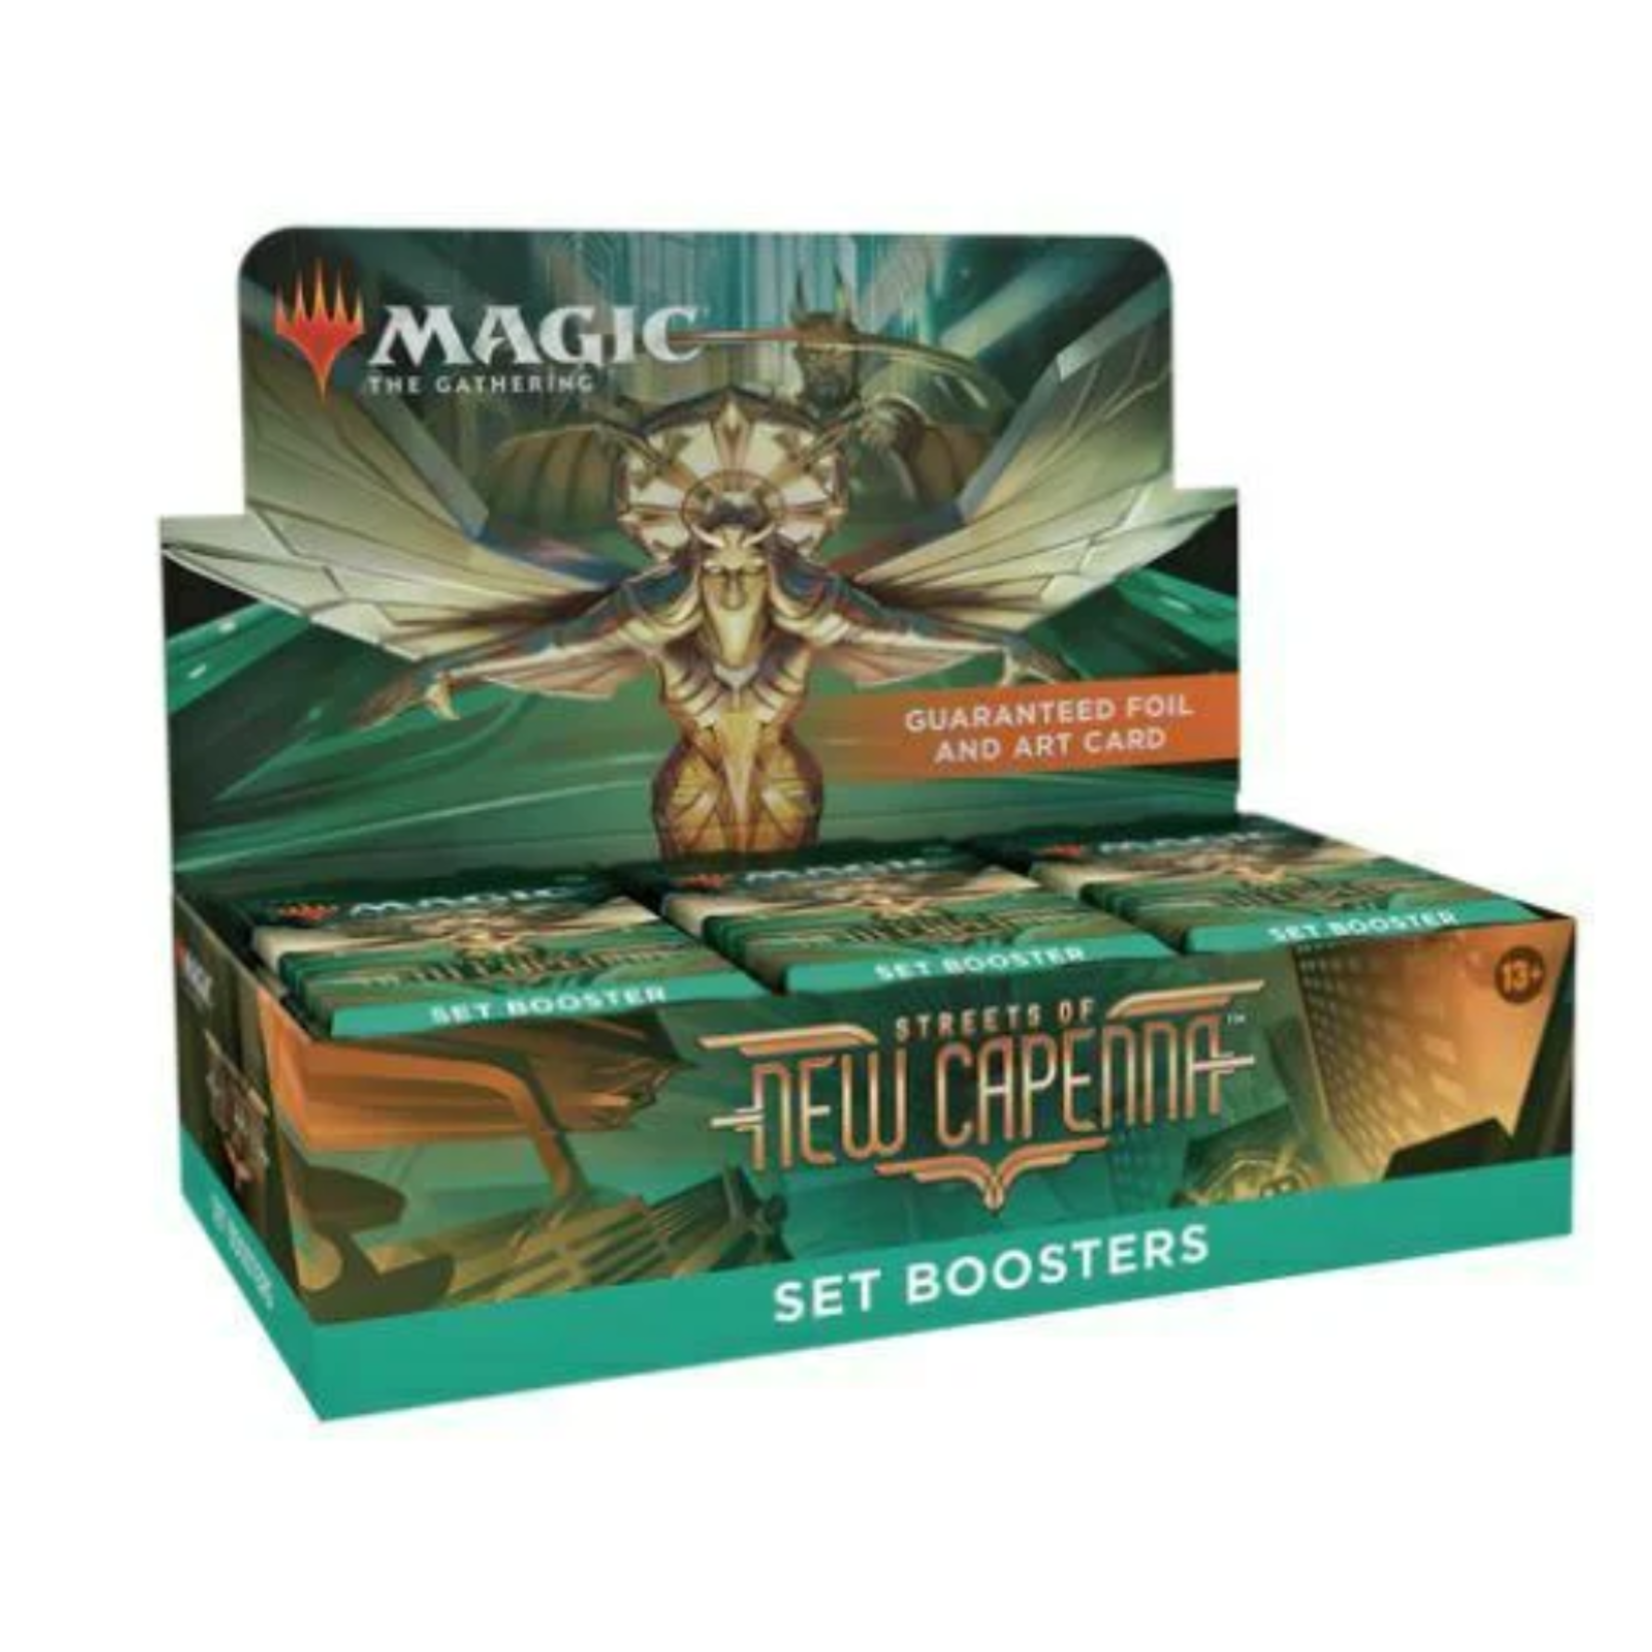 Streets of New Capenna - Set Booster Box